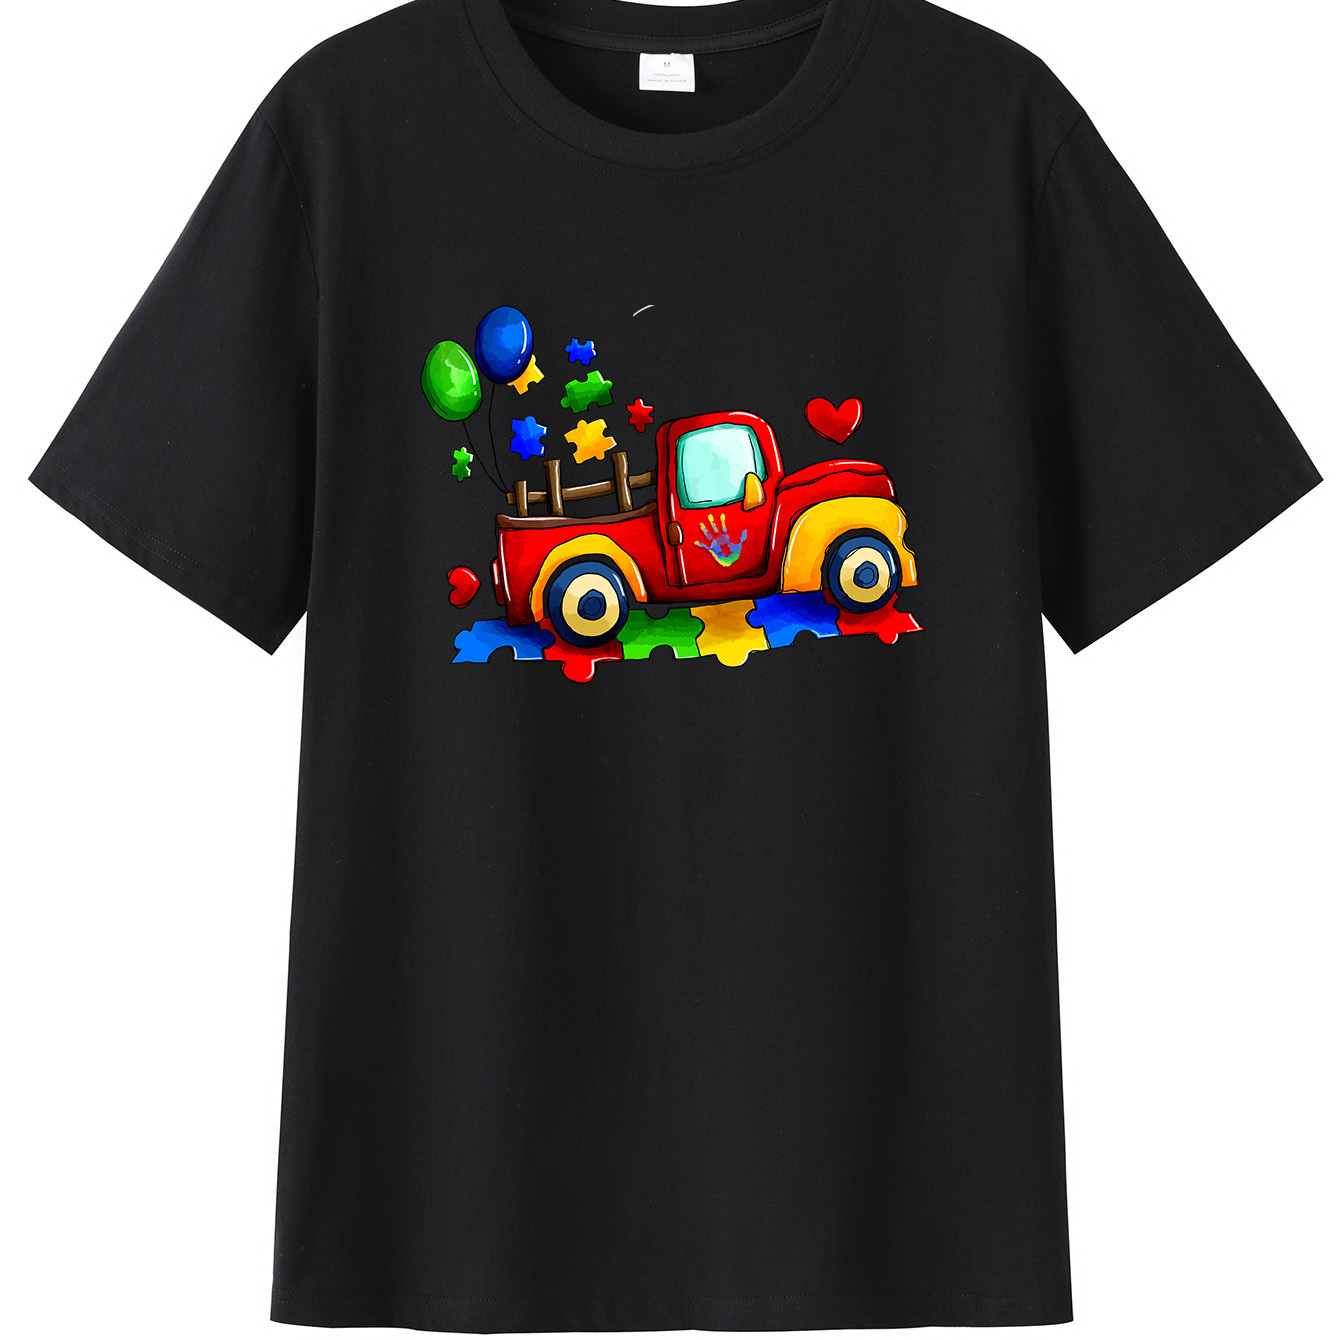 

T-shirt For Men, Casual Summer Top, Comfortable And Fashion Crew Neck Short Sleeve With Autism Creative Print, Suitable For Daily Wear